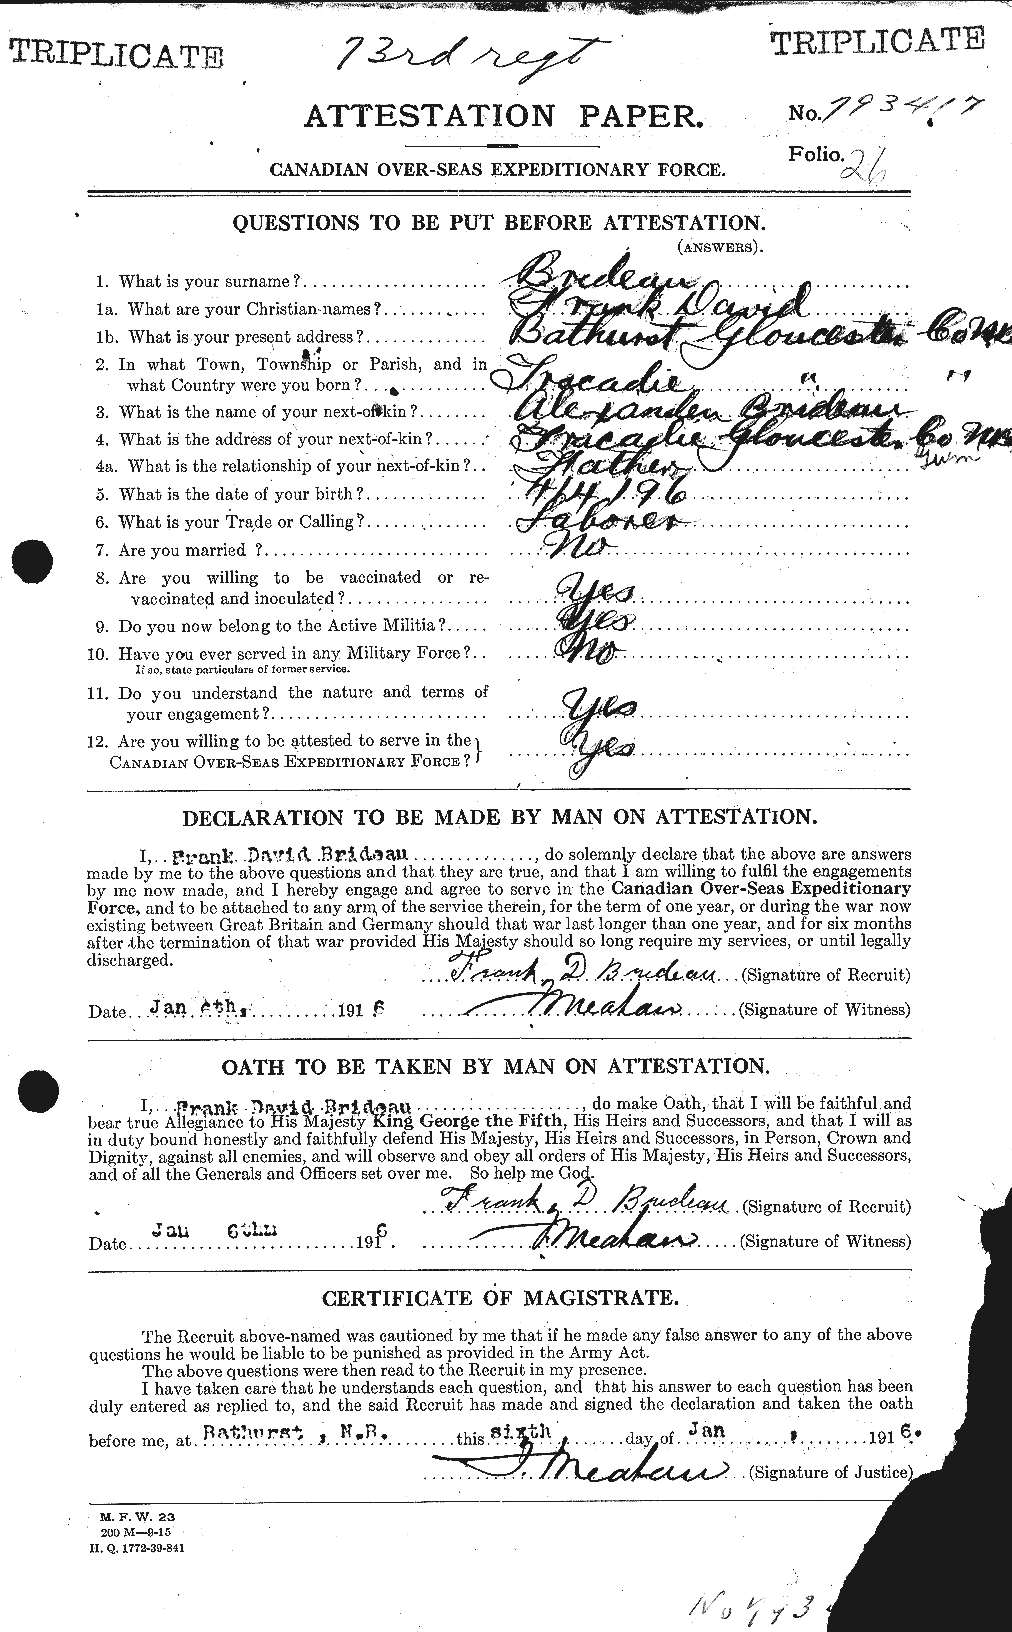 Personnel Records of the First World War - CEF 261259a